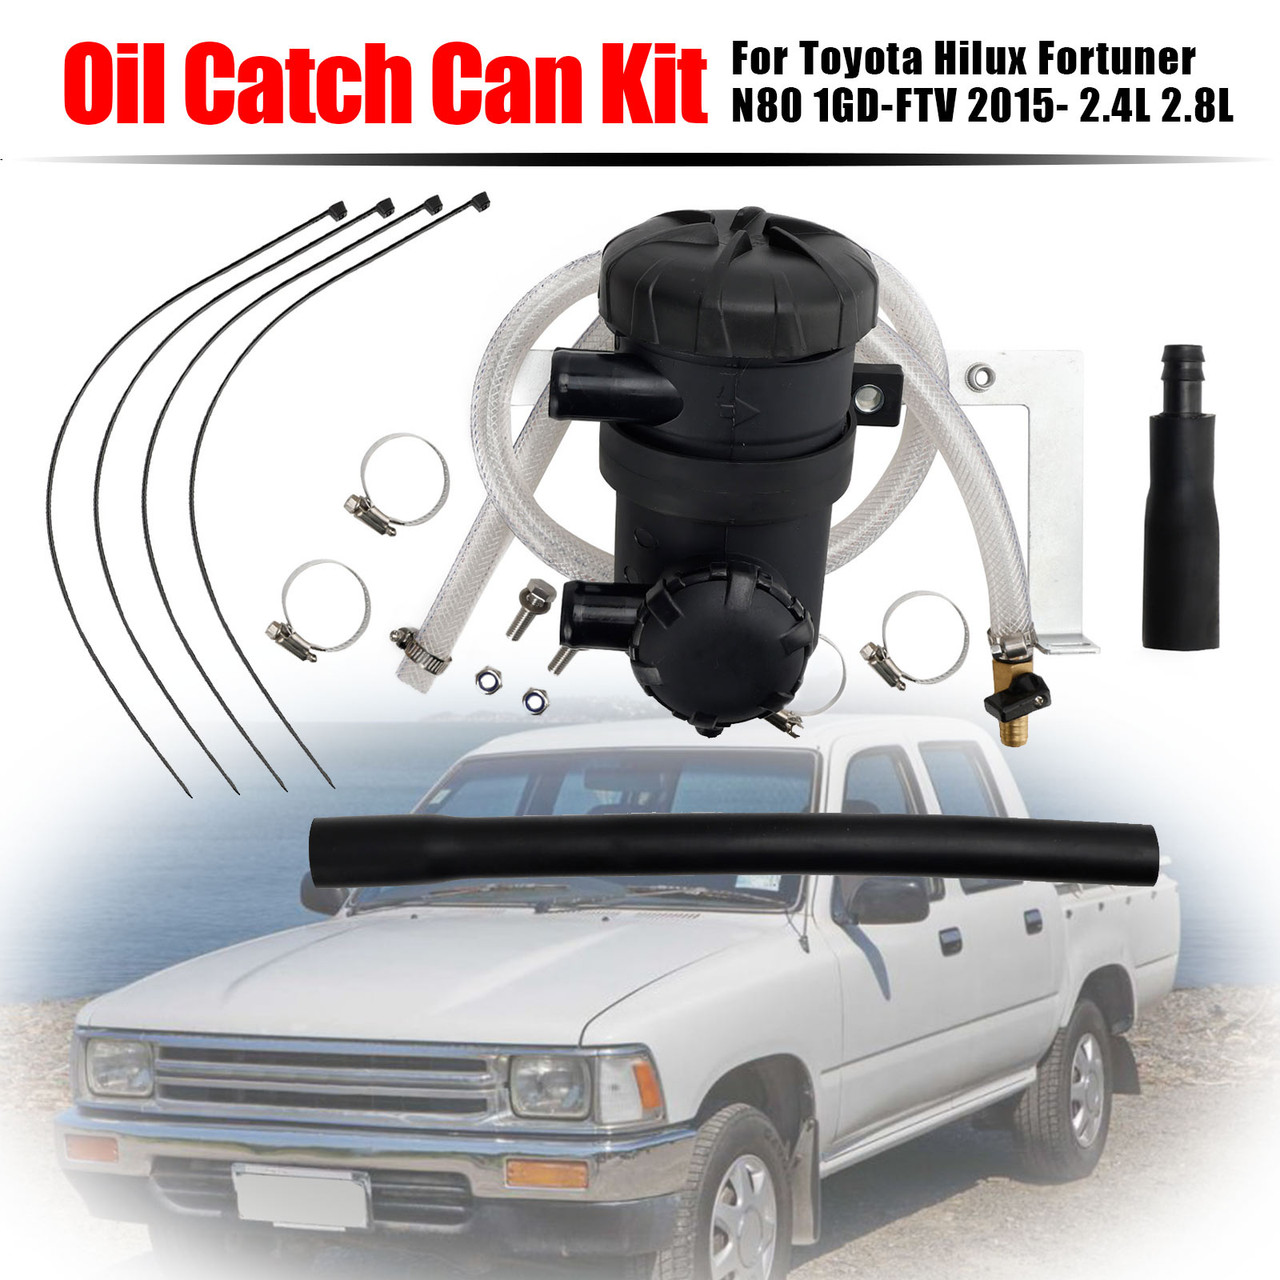 Oil Catch Can Kit OS-PROV-12 For Toyota Hilux Fortuner 1GD-FTV 2015 2.4L 2.8L